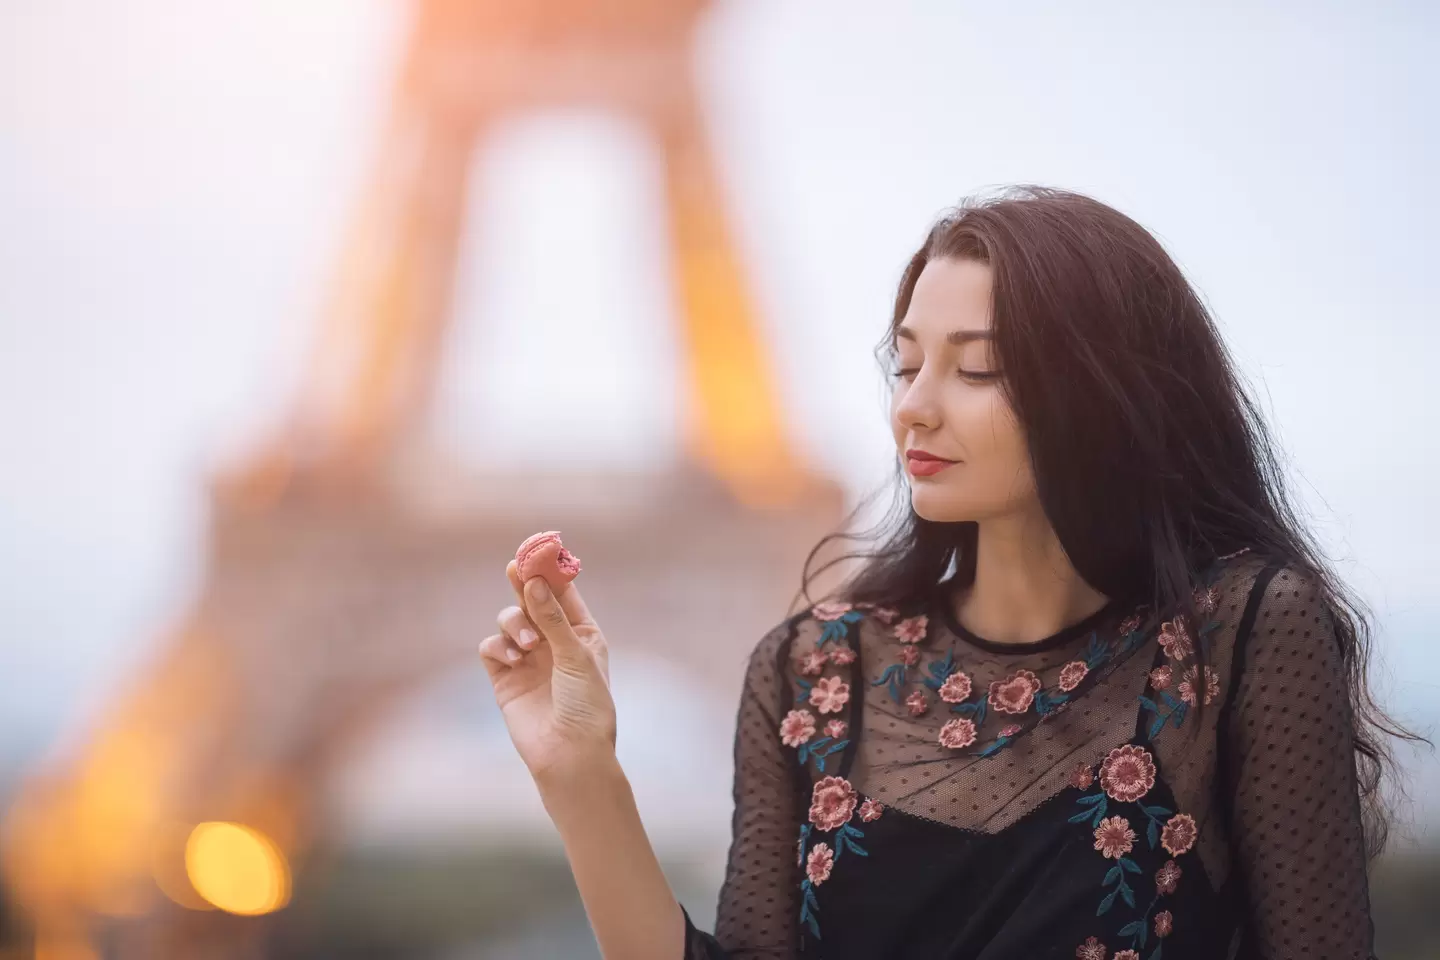 paris woman smiling eating the french pastry macar 2021 08 28 23 14 41 utc 2